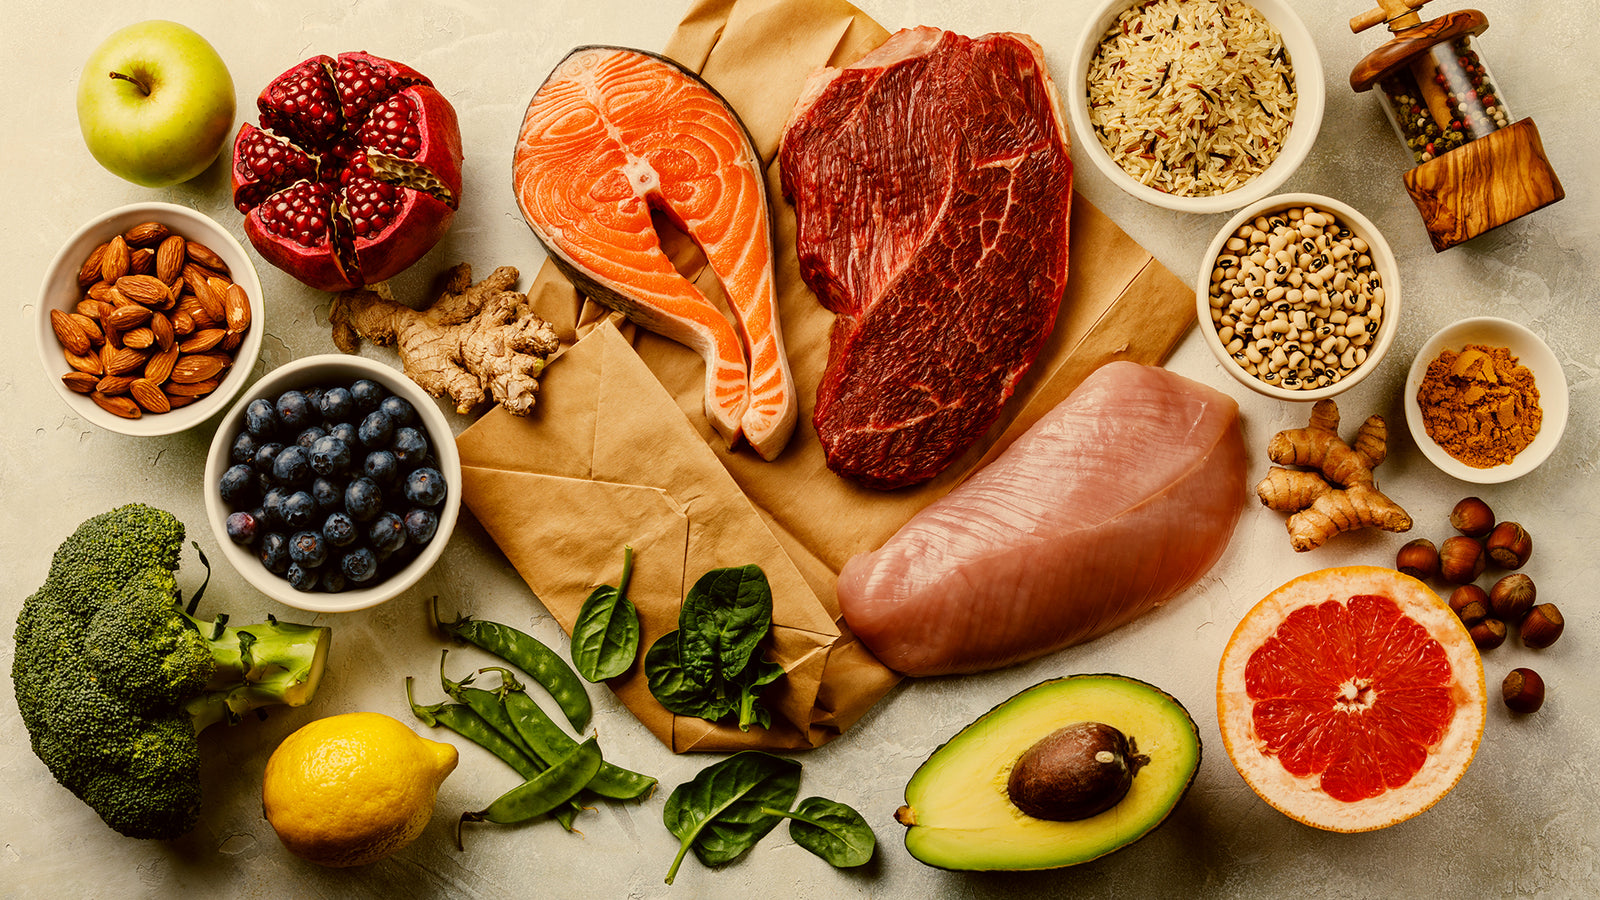 What are Macronutrients?